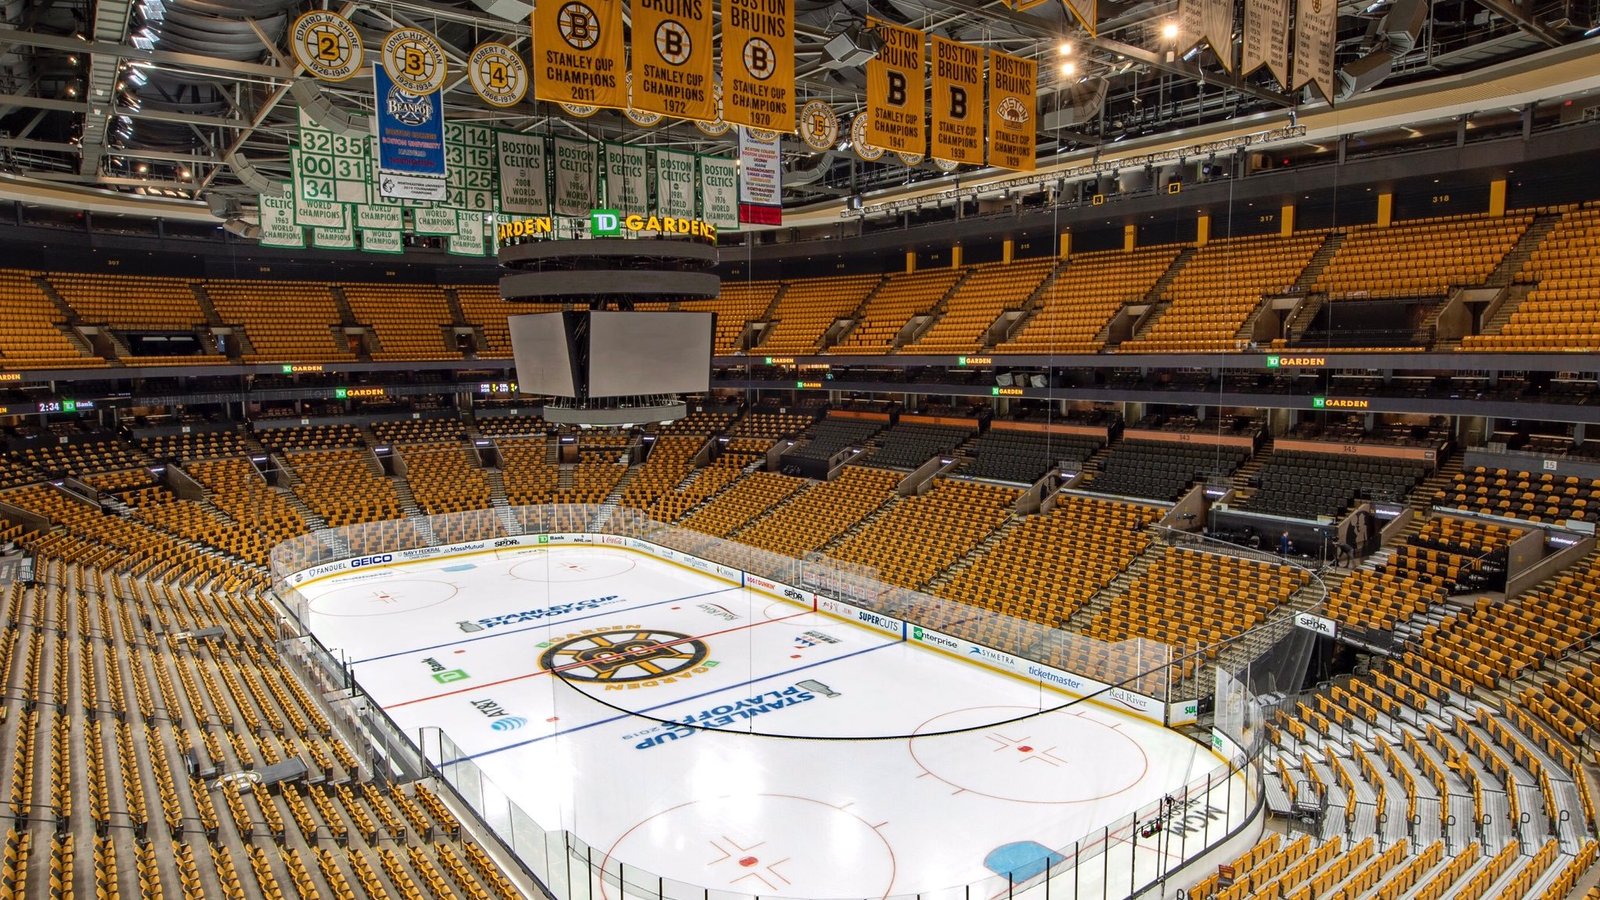 TD Garden shows off new seats, other upgrades